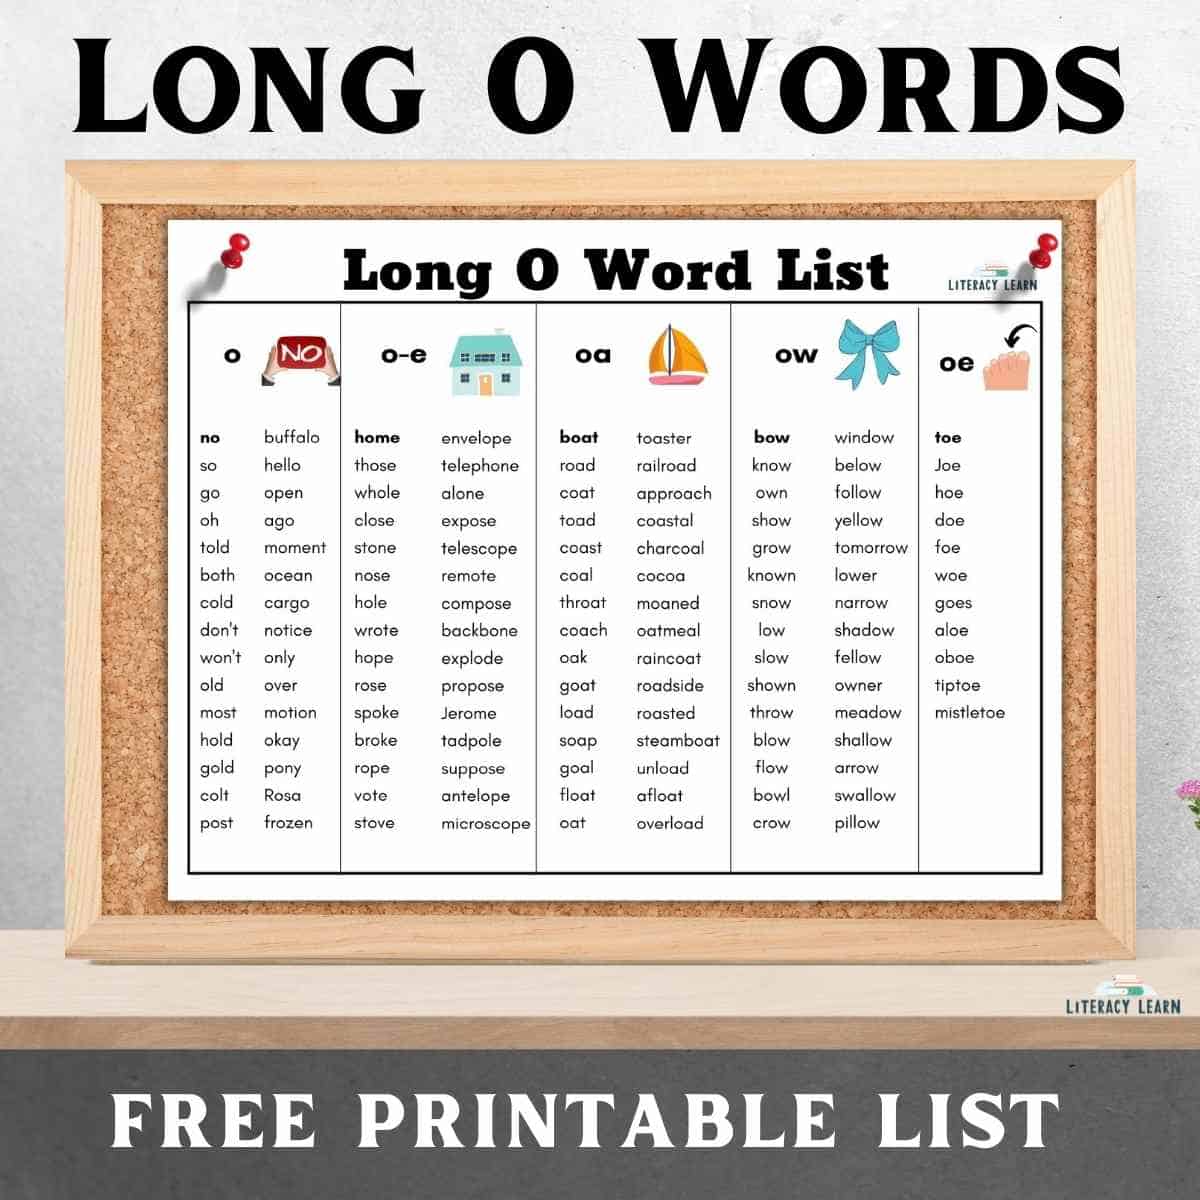 131-long-o-vowel-sound-words-free-printable-list-literacy-learn